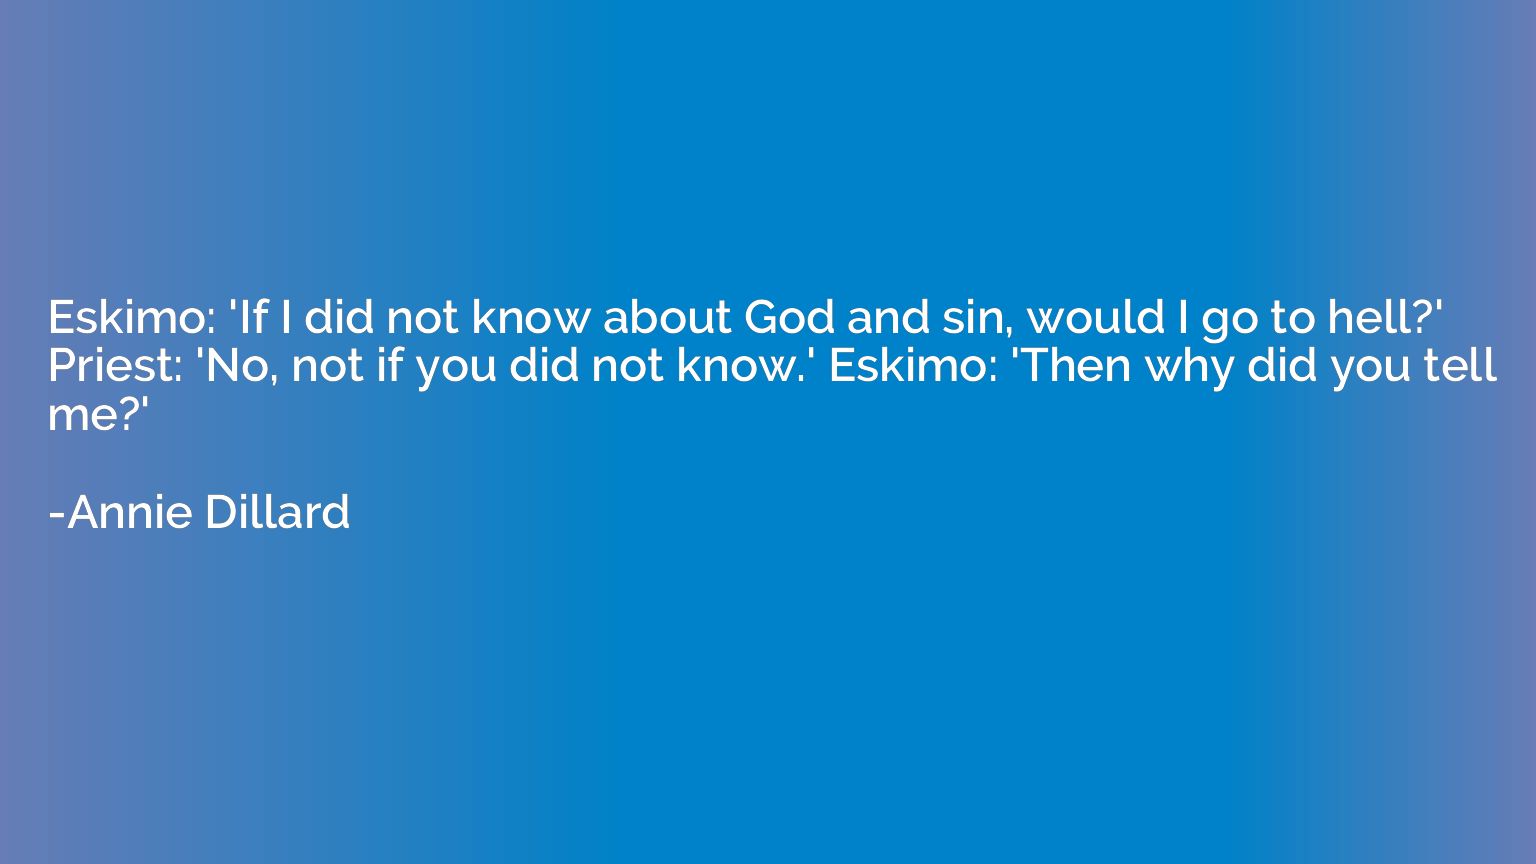 Eskimo: 'If I did not know about God and sin, would I go to 